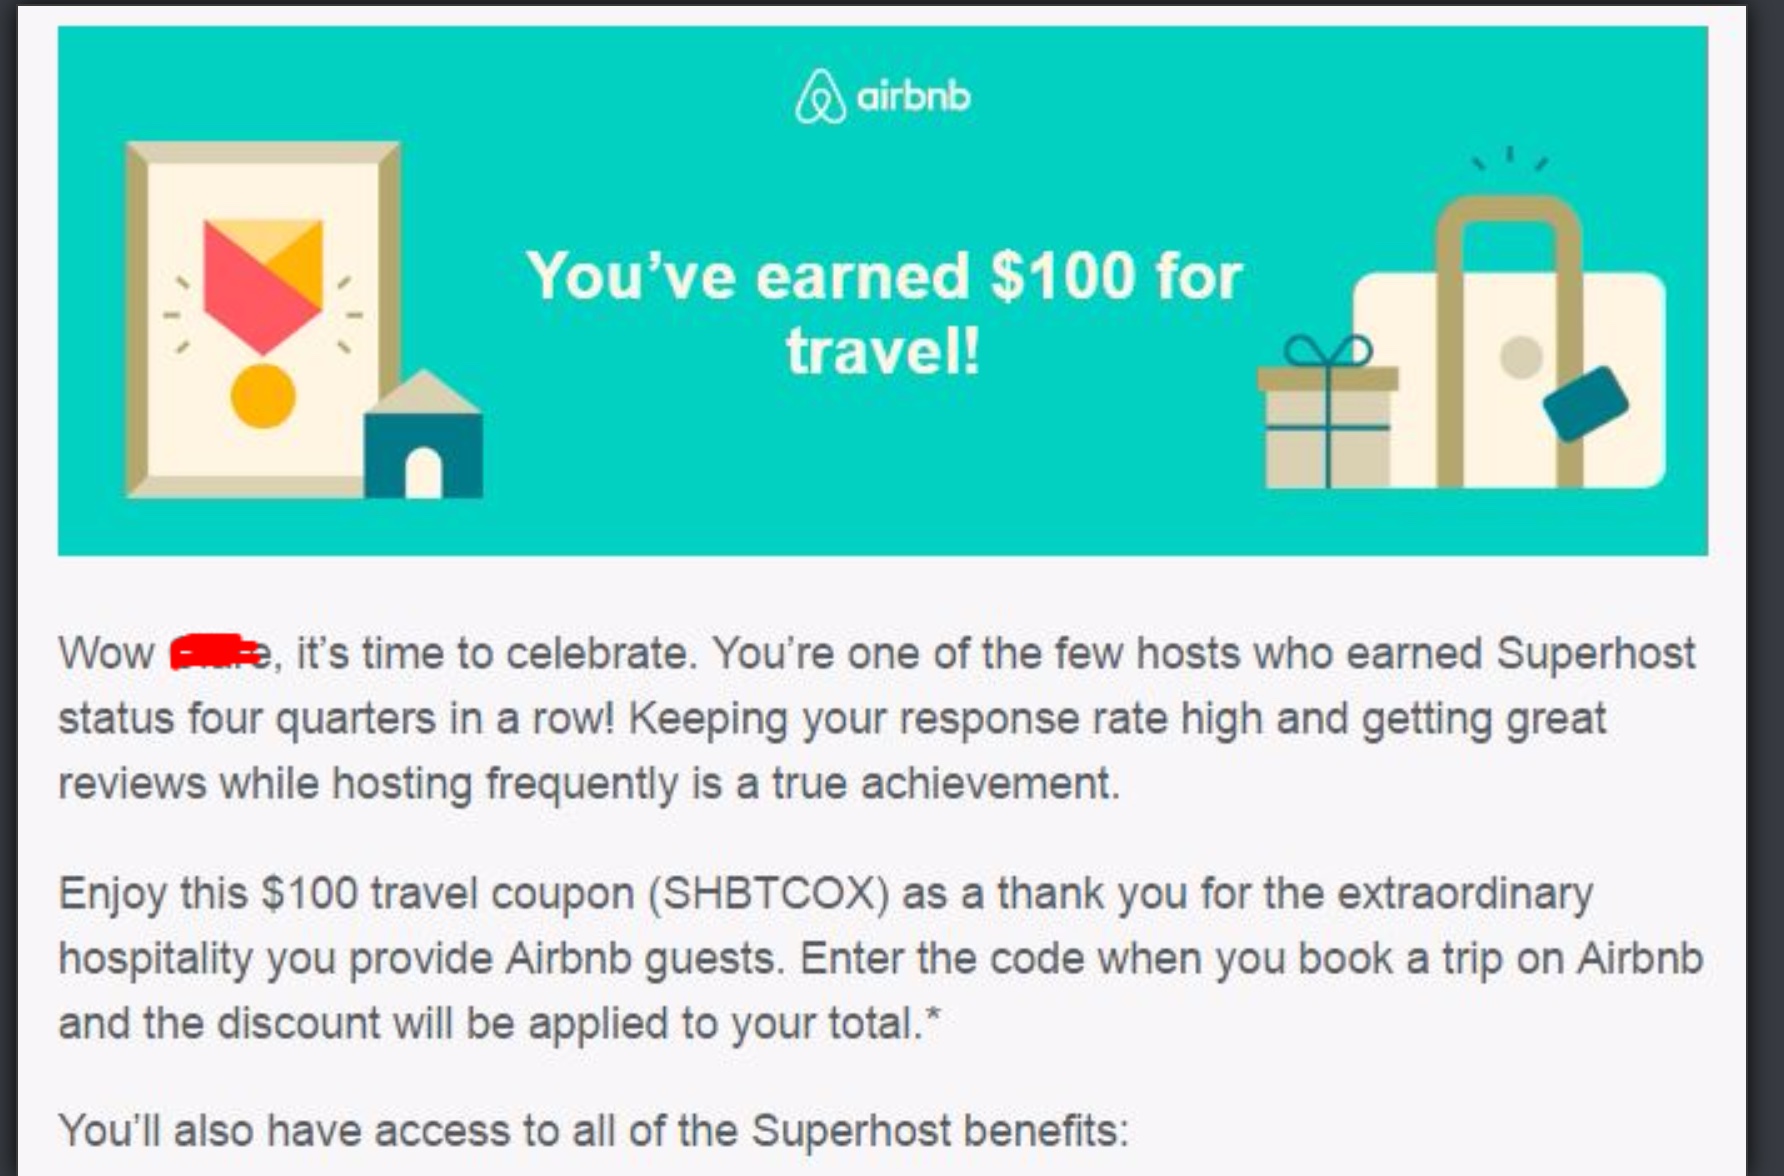 airbnb superhost travel coupon